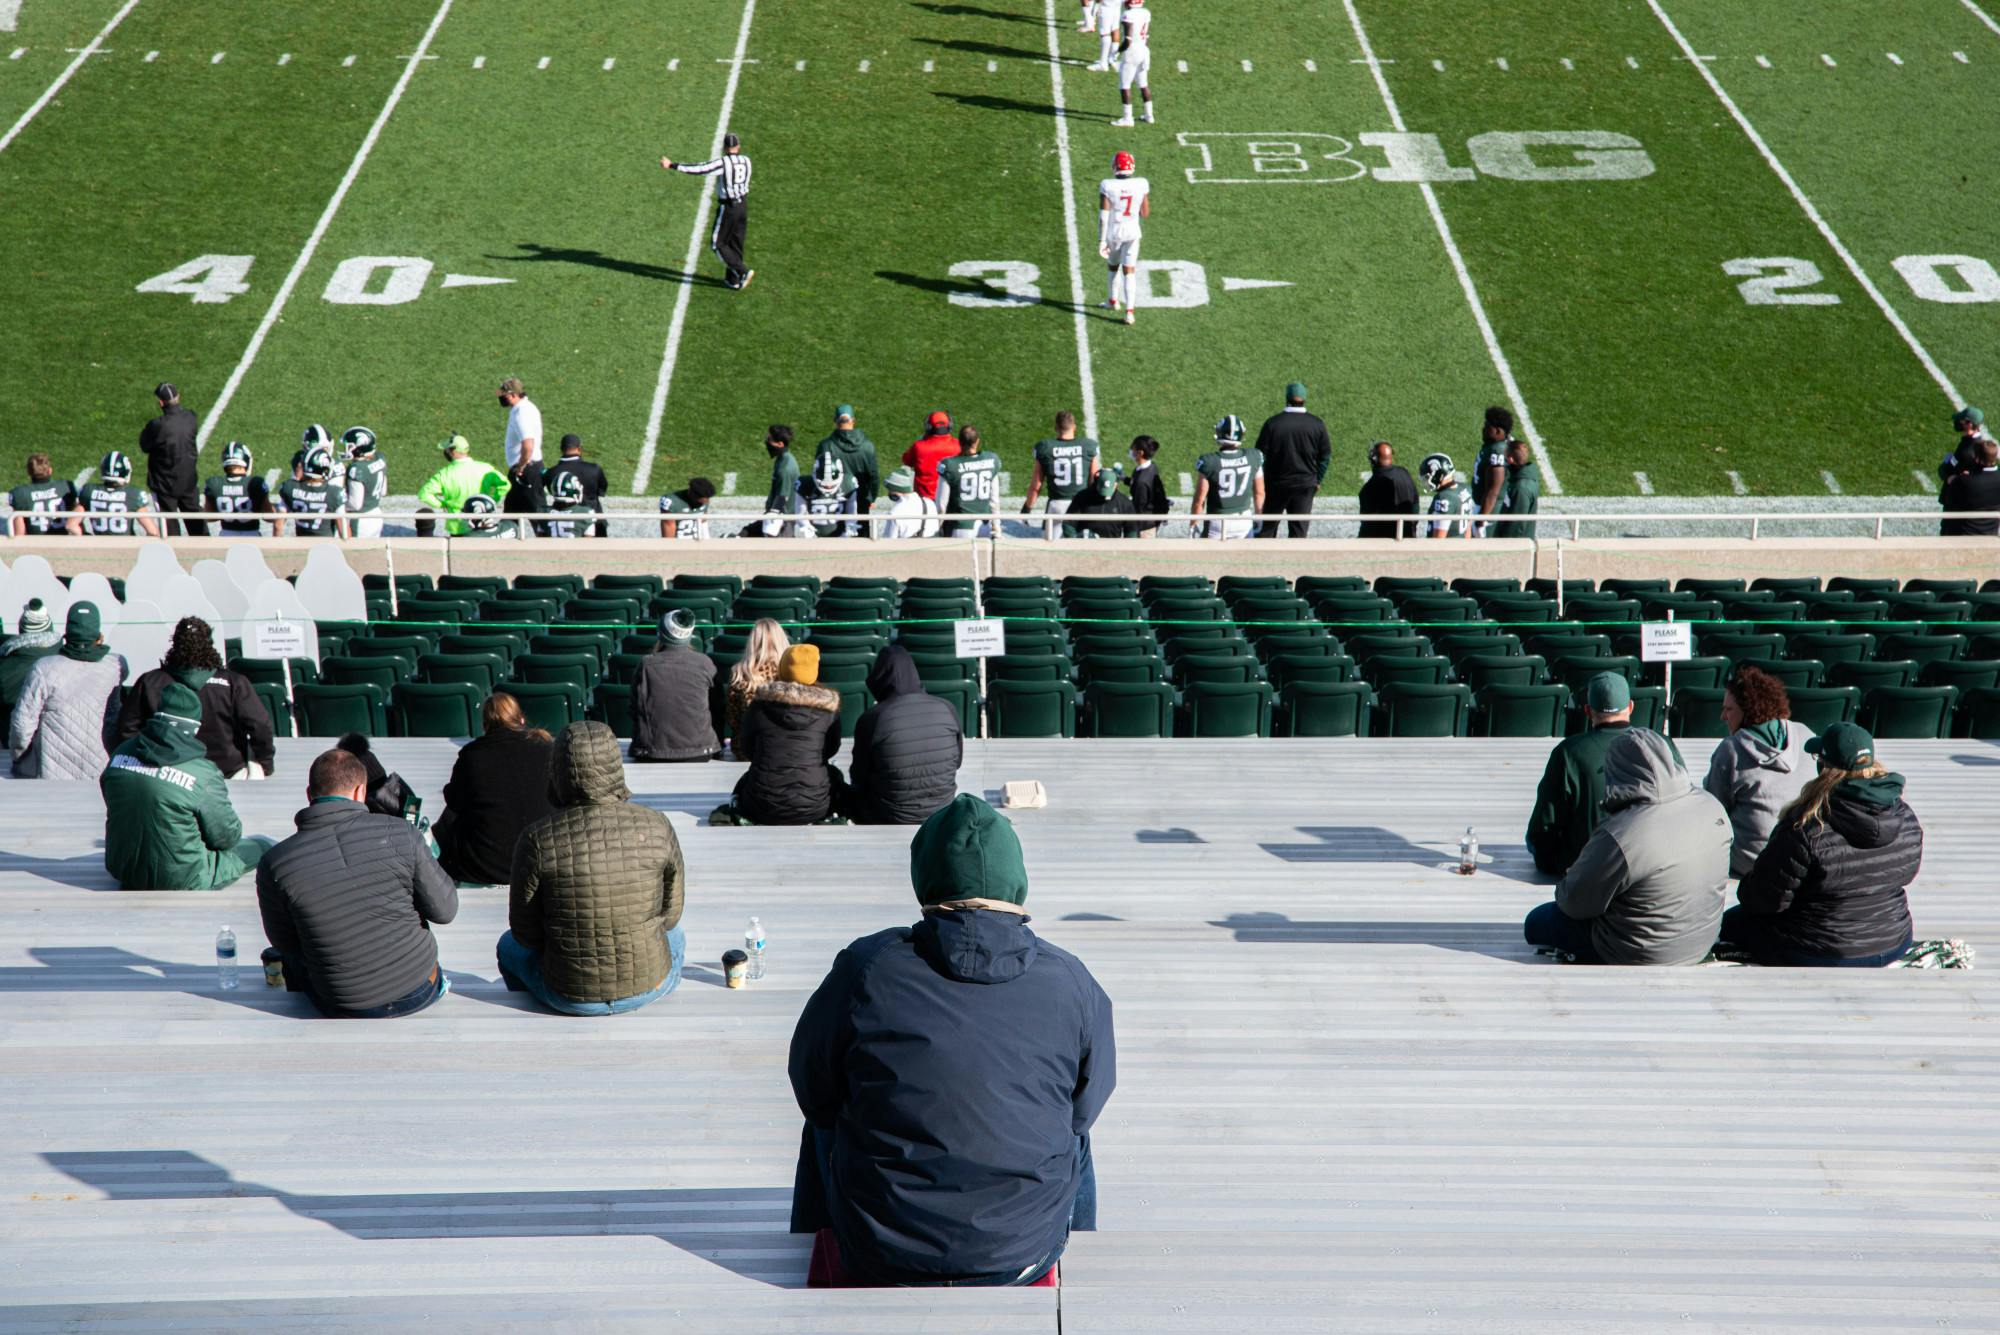 Fans socially distance at Spartan Stadium on Oct. 24, 2020 during a football game against Rutgers.